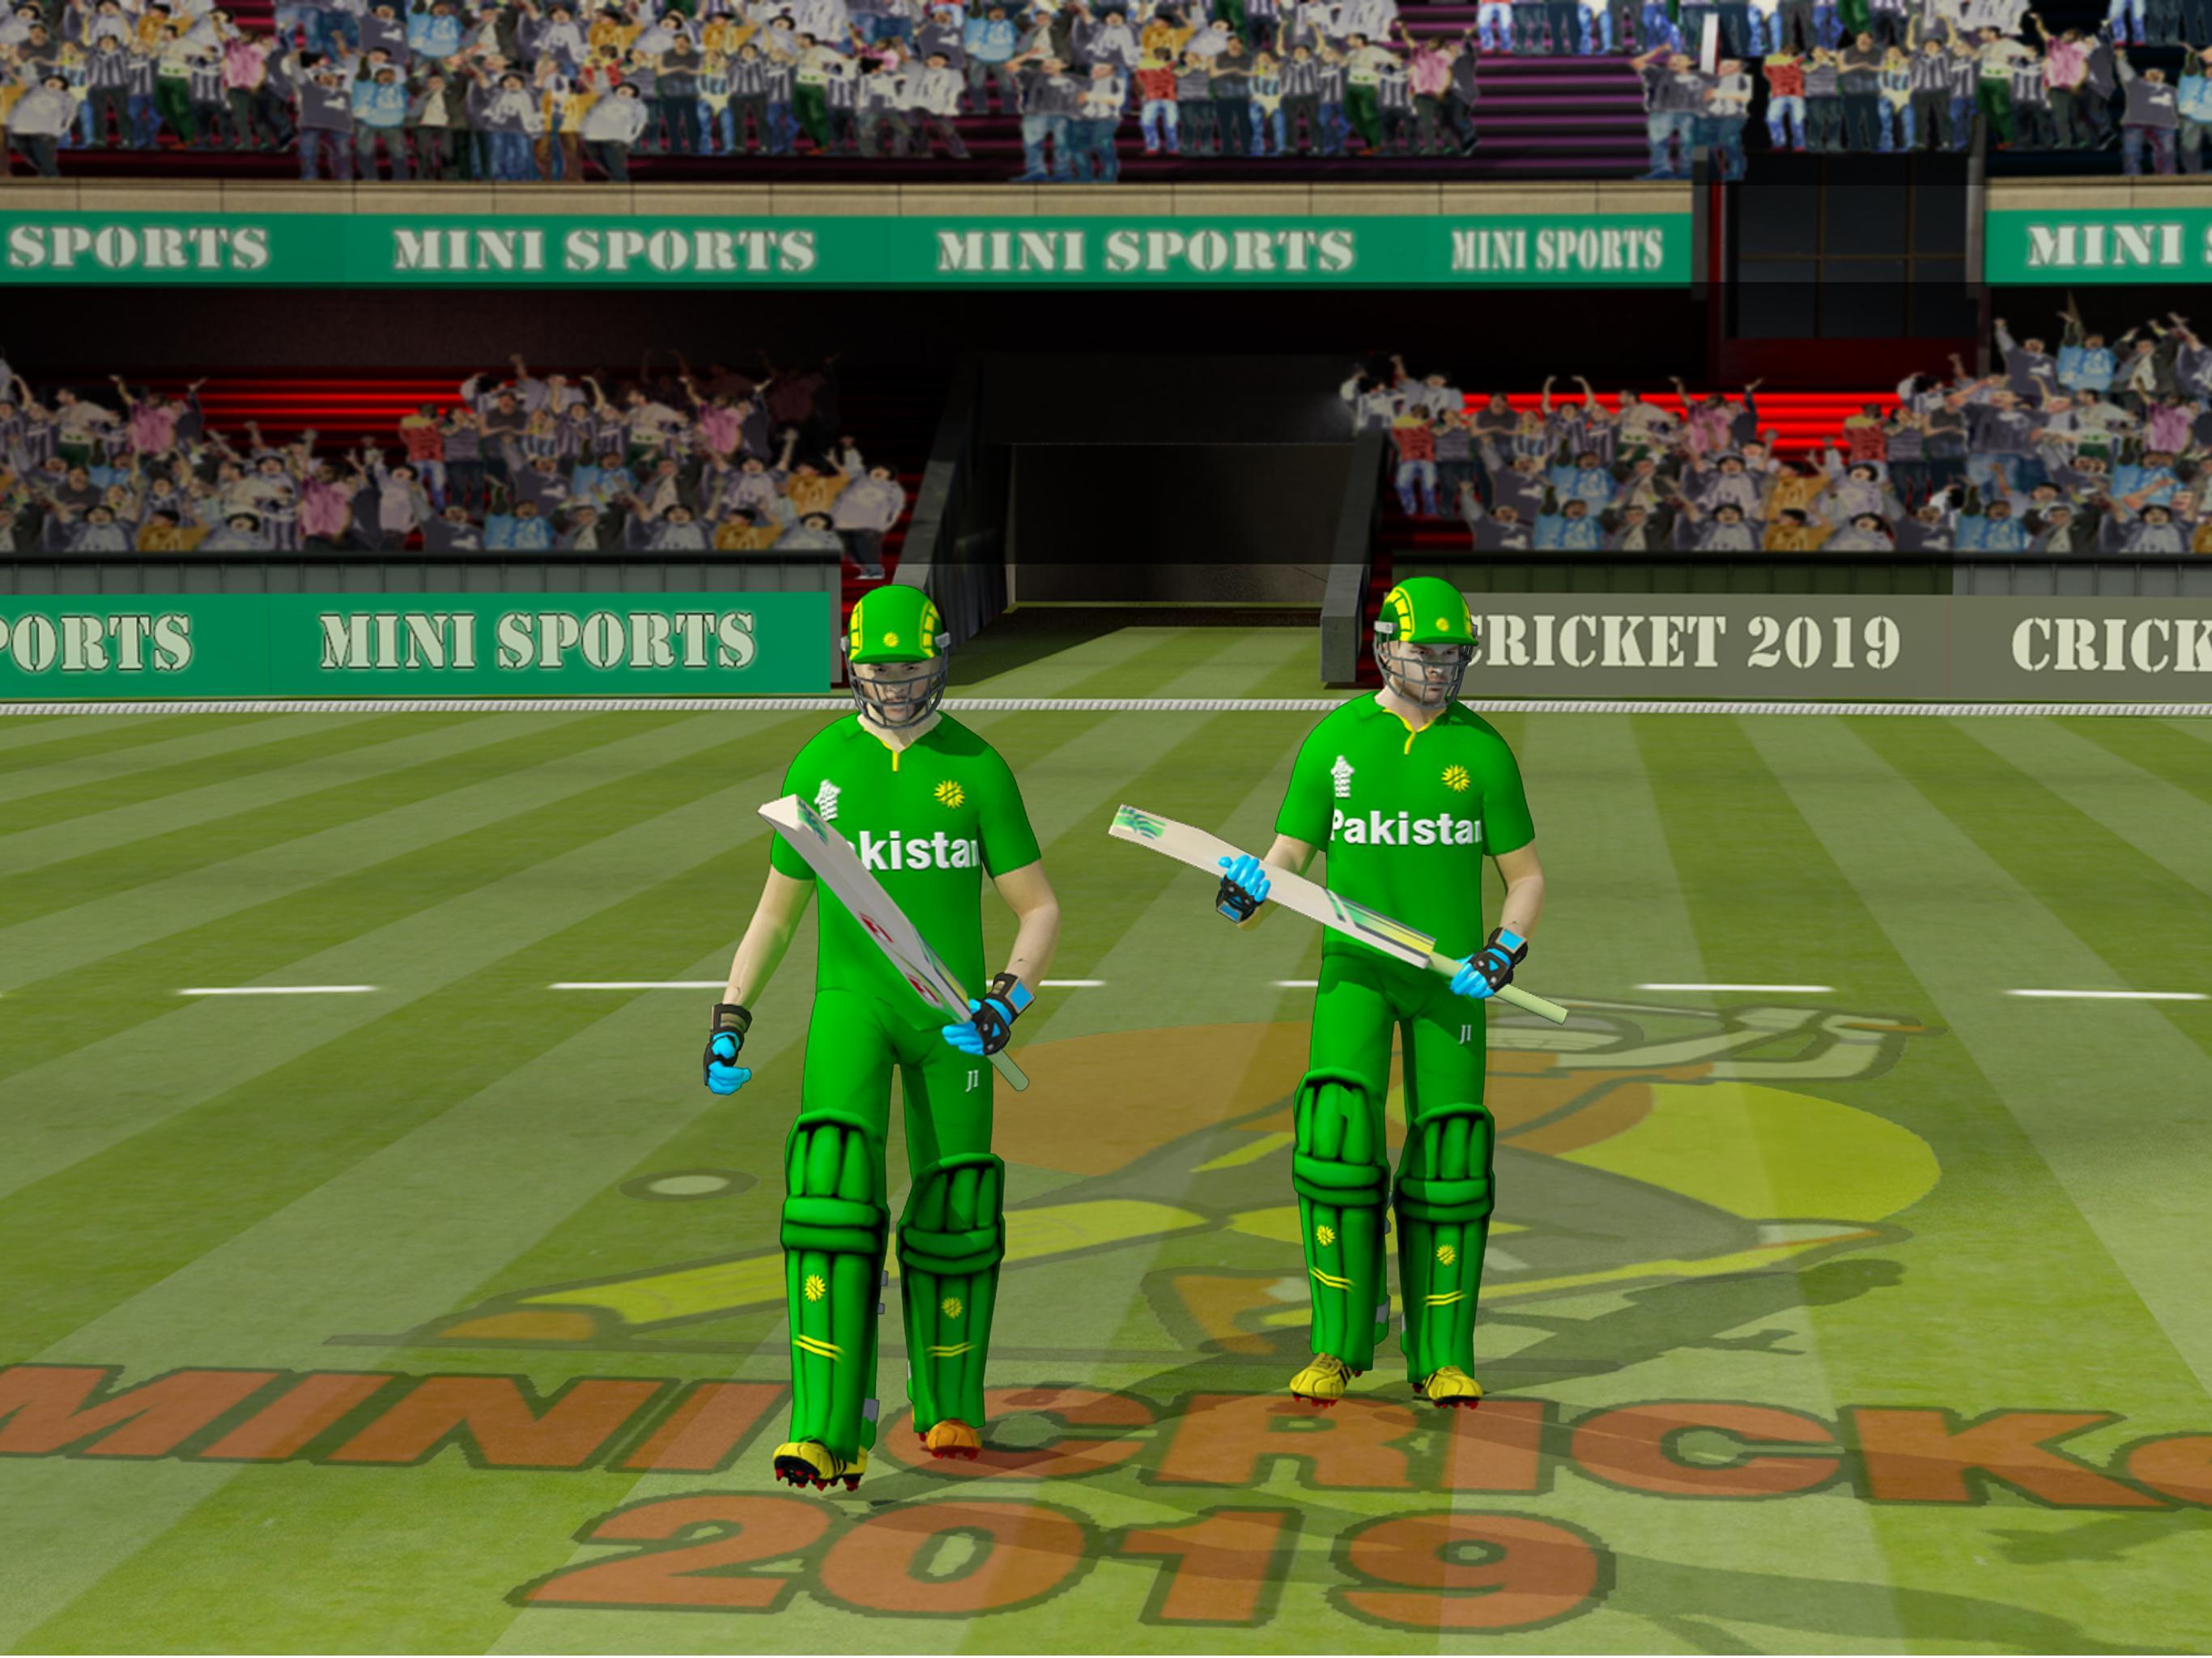 cricket games 2011 world cup free download utorrent movies